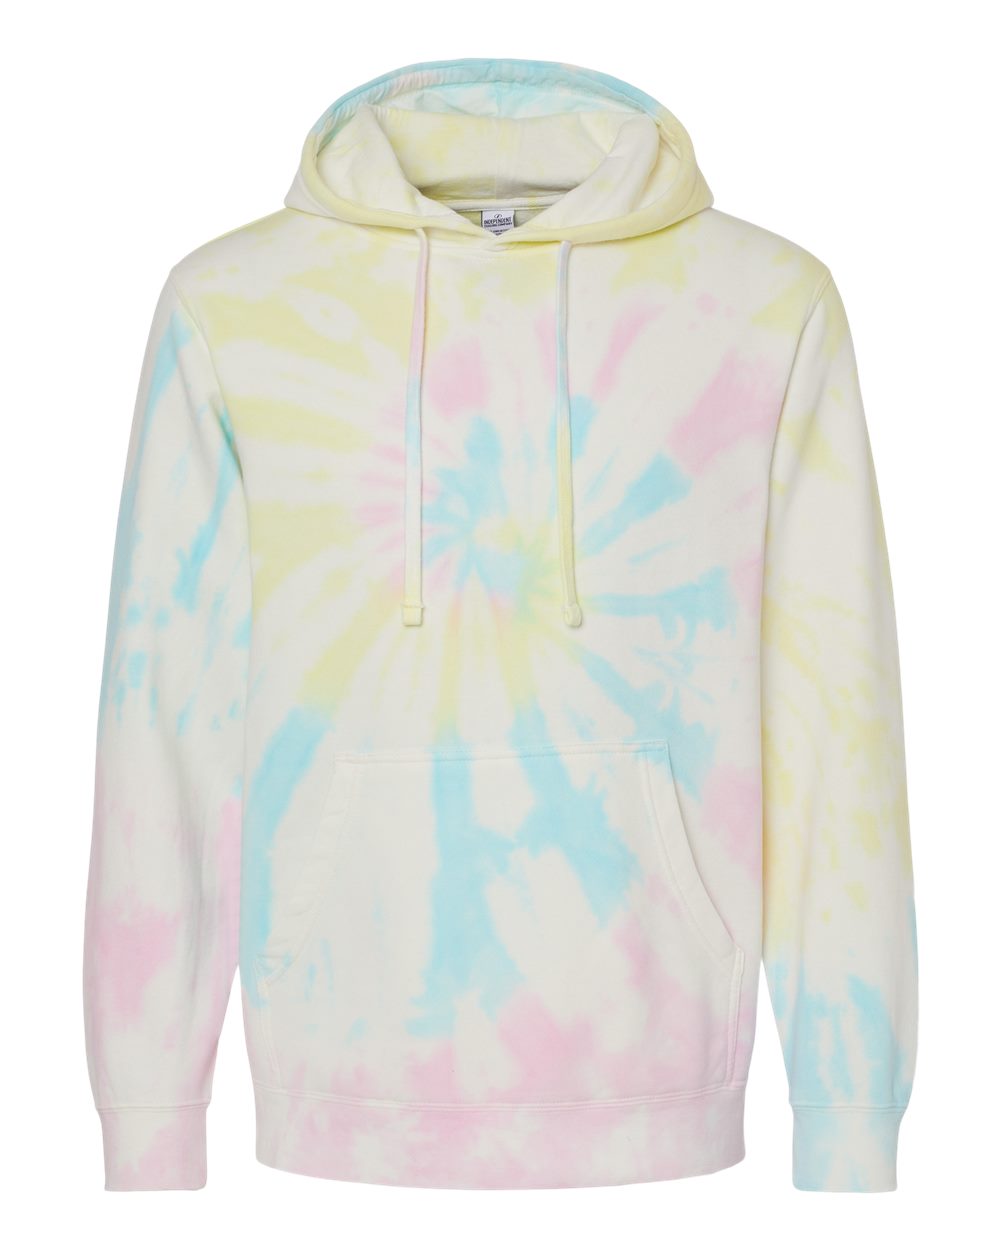 Independent Trading Co. Unisex Midweight Tie-Dyed Hooded Sweatshirt PRM4500TD #color_Tie Dye Sunset Swirl